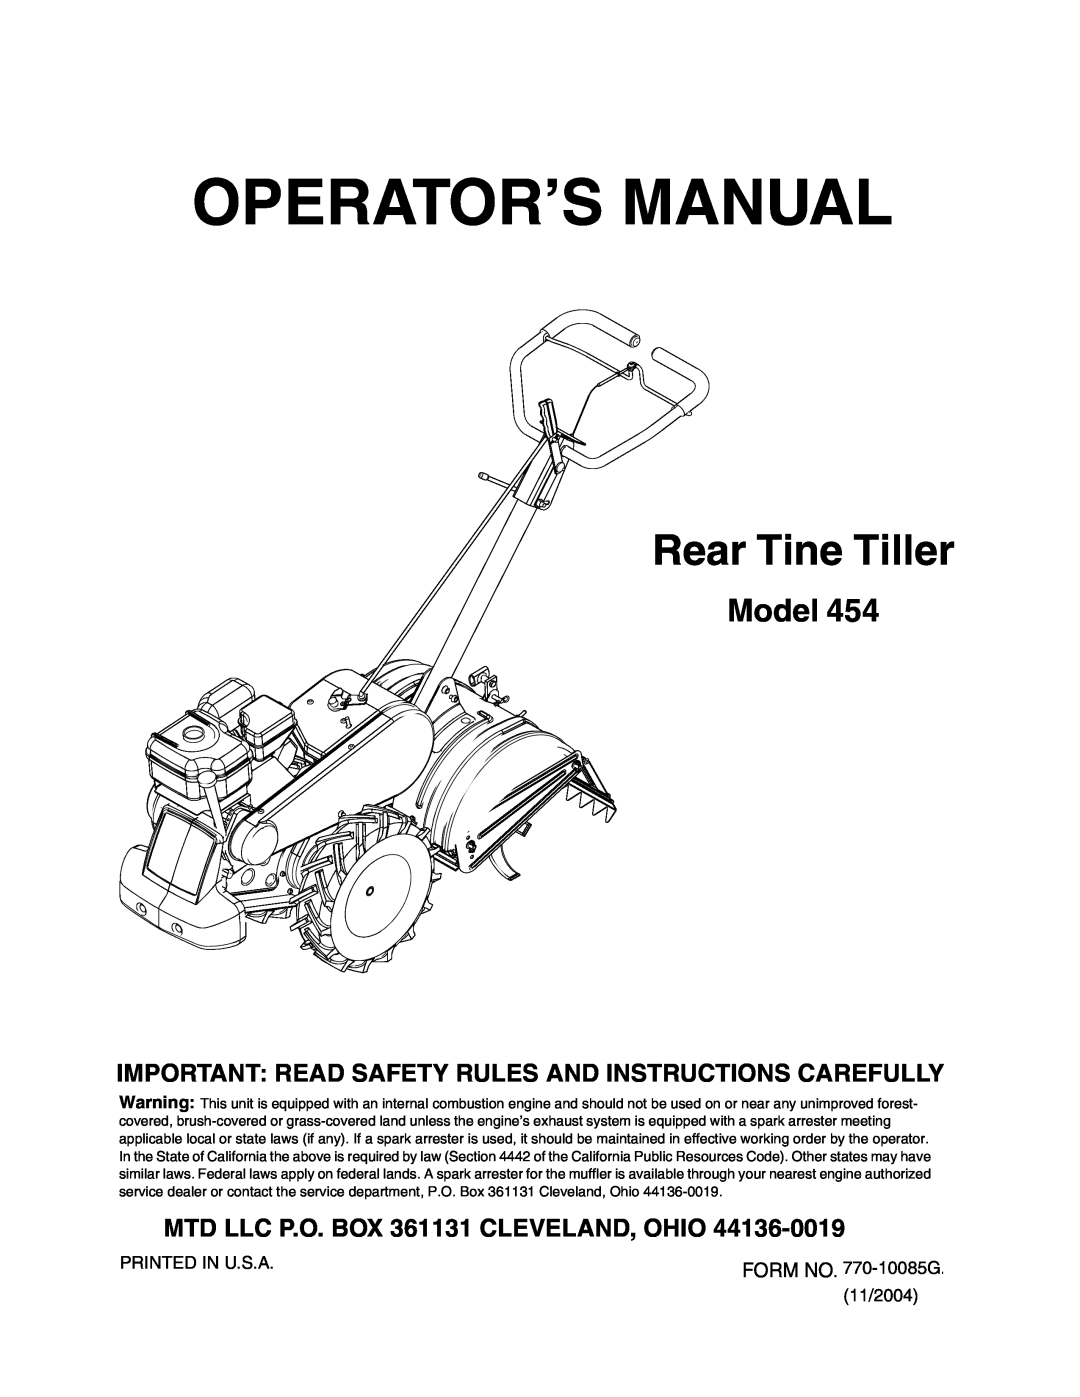 MTD 454 manual Operator’S Manual, Rear Tine Tiller, Model, Important Read Safety Rules And Instructions Carefully 